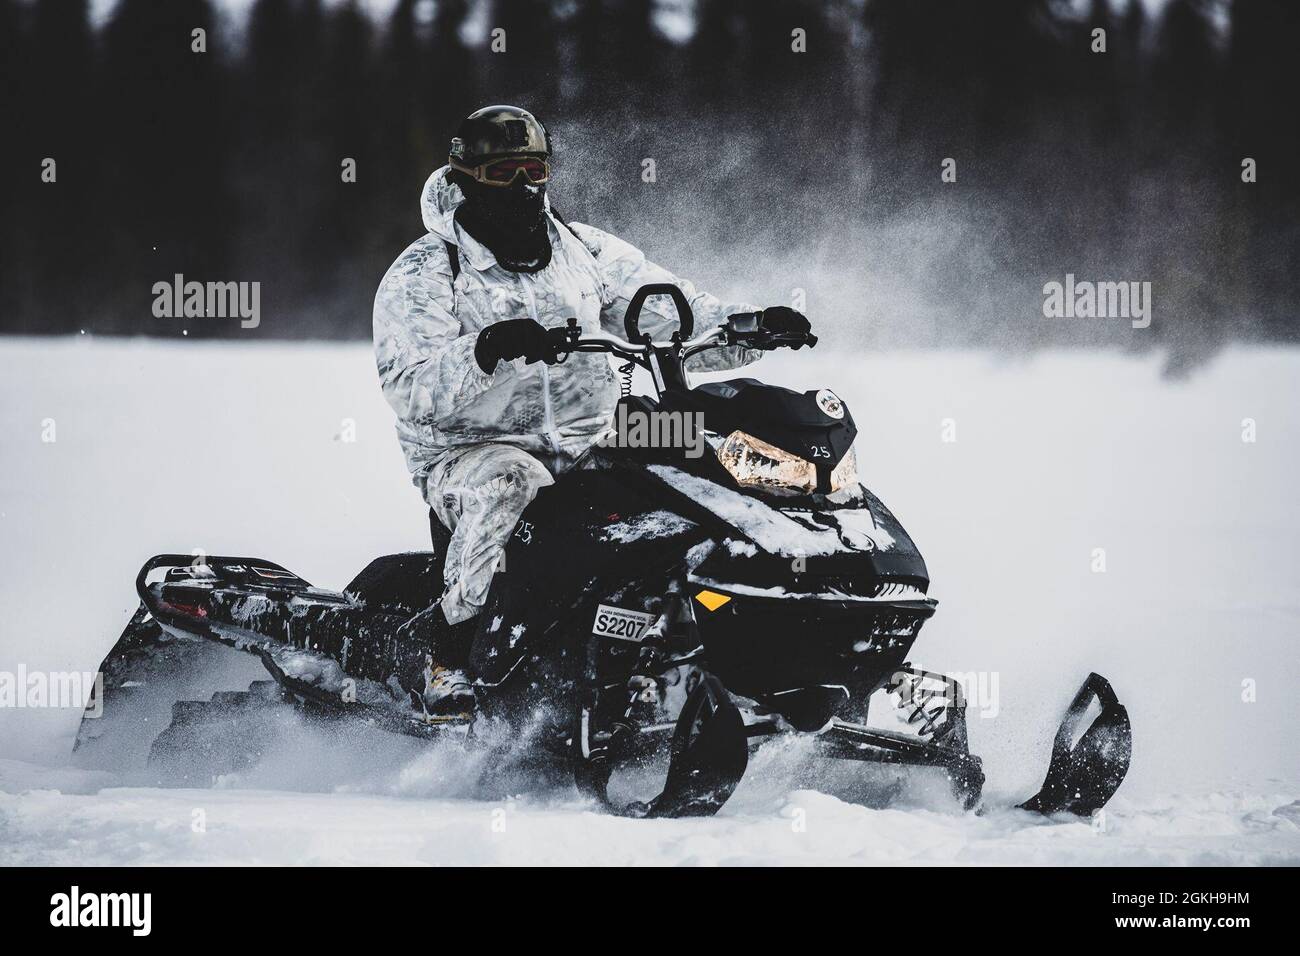 TALKEETNA, Alaska- A Green Beret with 1st Battalion, 1st Special Forces Group (Airborne), maneuvers through the Arctic tundra on a snowmobile April 2021, during an Arctic Mobility Training. The Arctic has recently developed into an international competition space and potential future battlefield that 1st SFG (A) Soldiers will have to continue to familiarize themselves with. Stock Photo